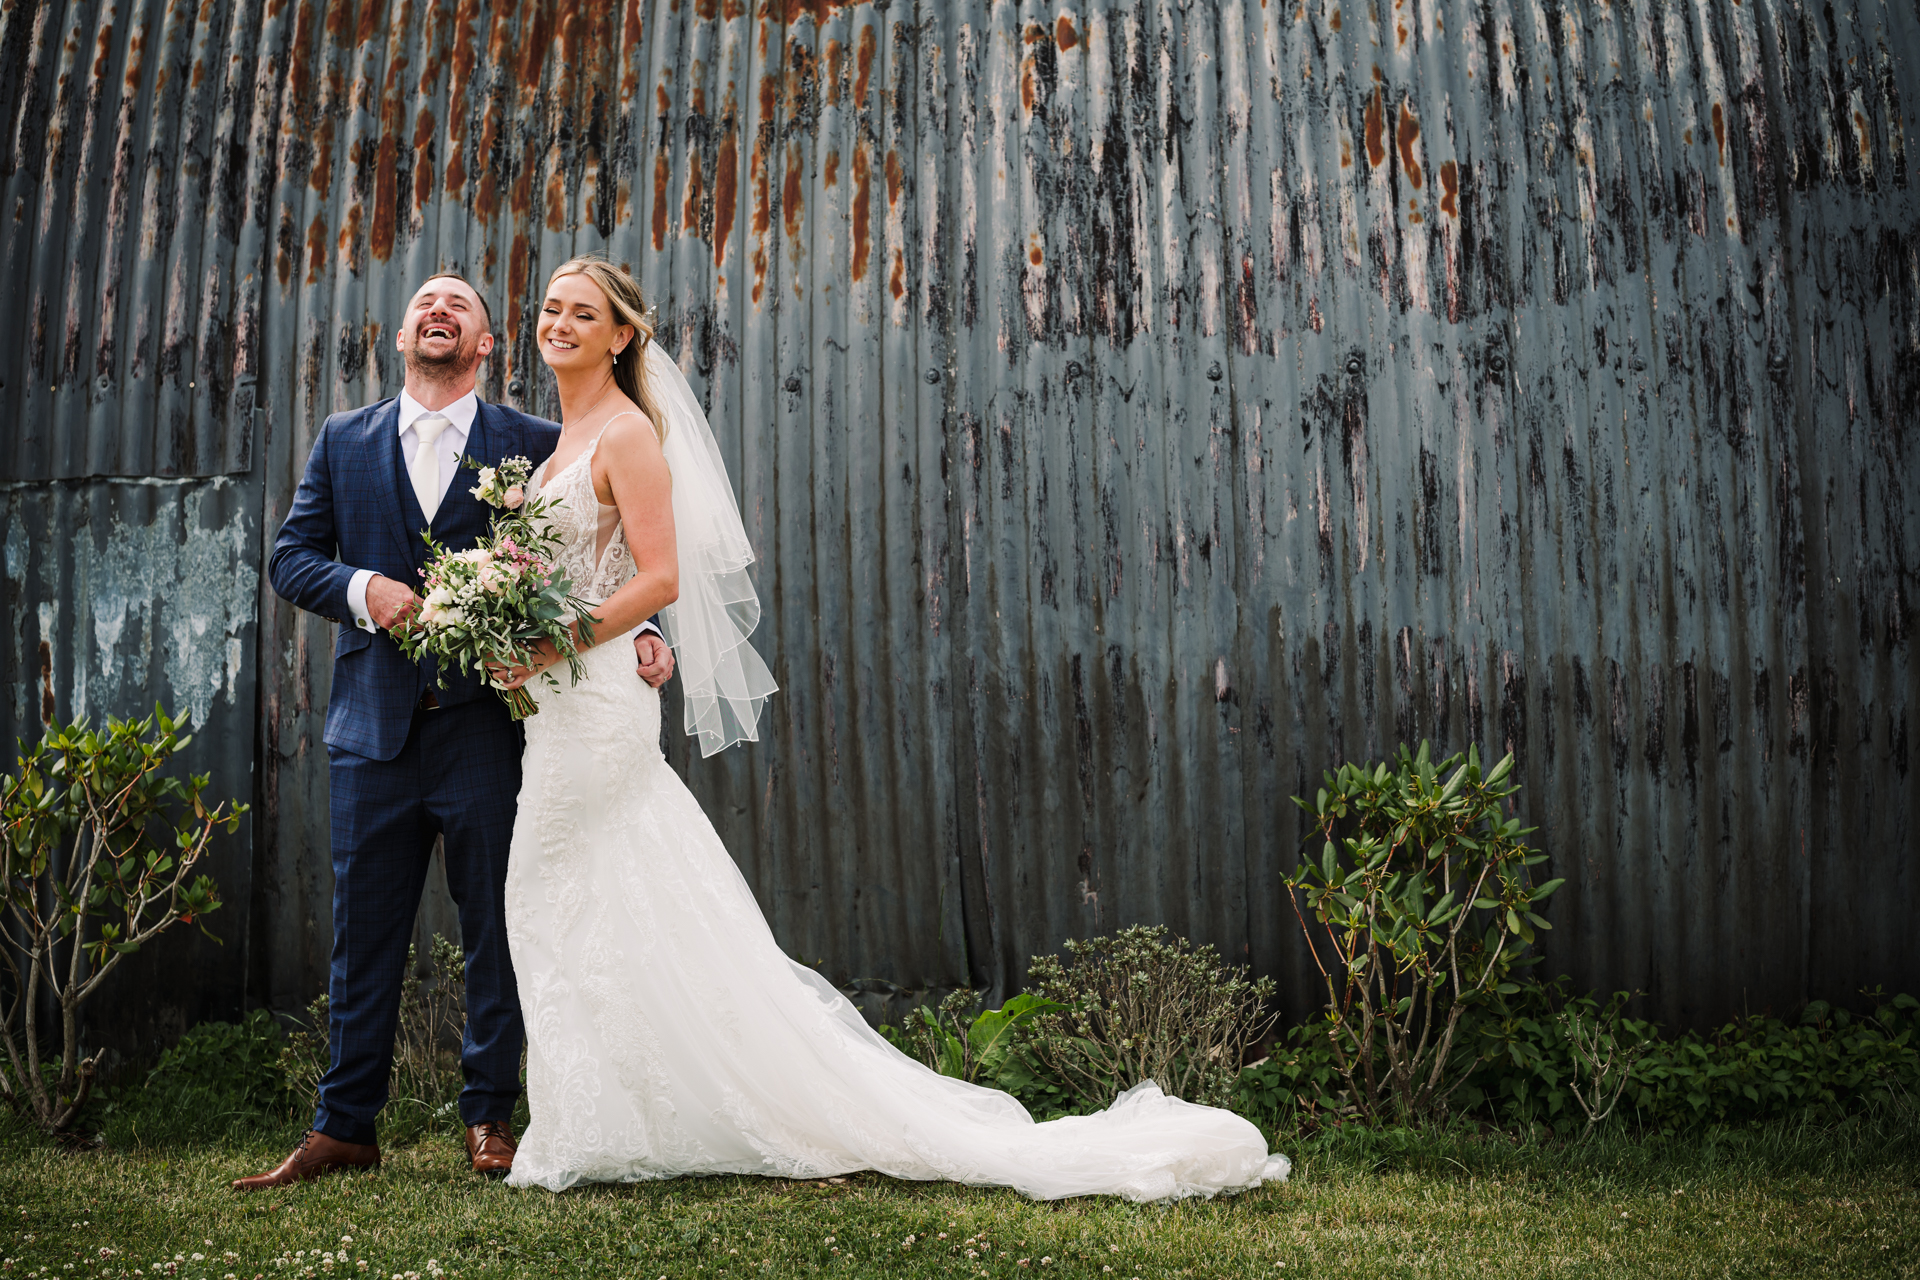 Bride and groom share a joke during their wedding day photography